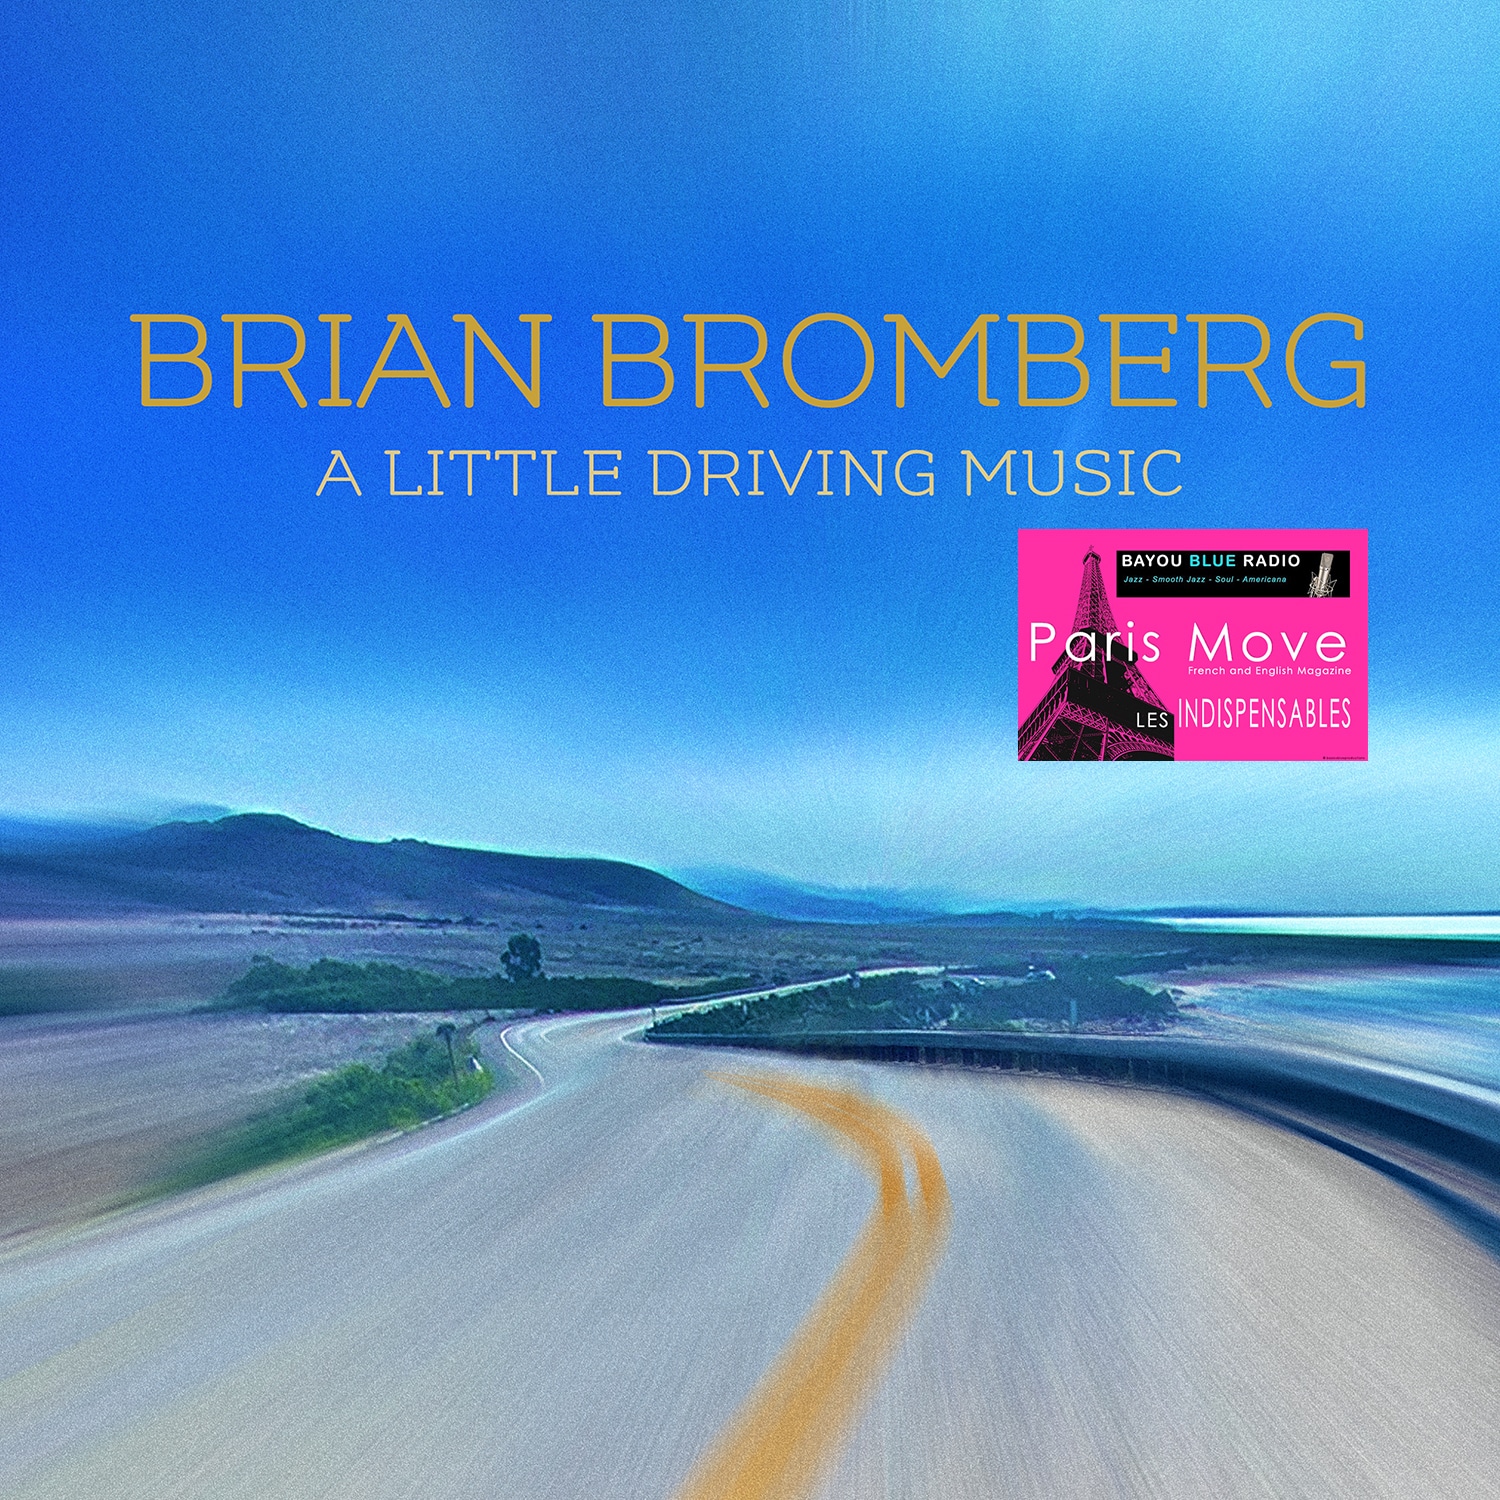 Brian Bromberg - A little Driving Music